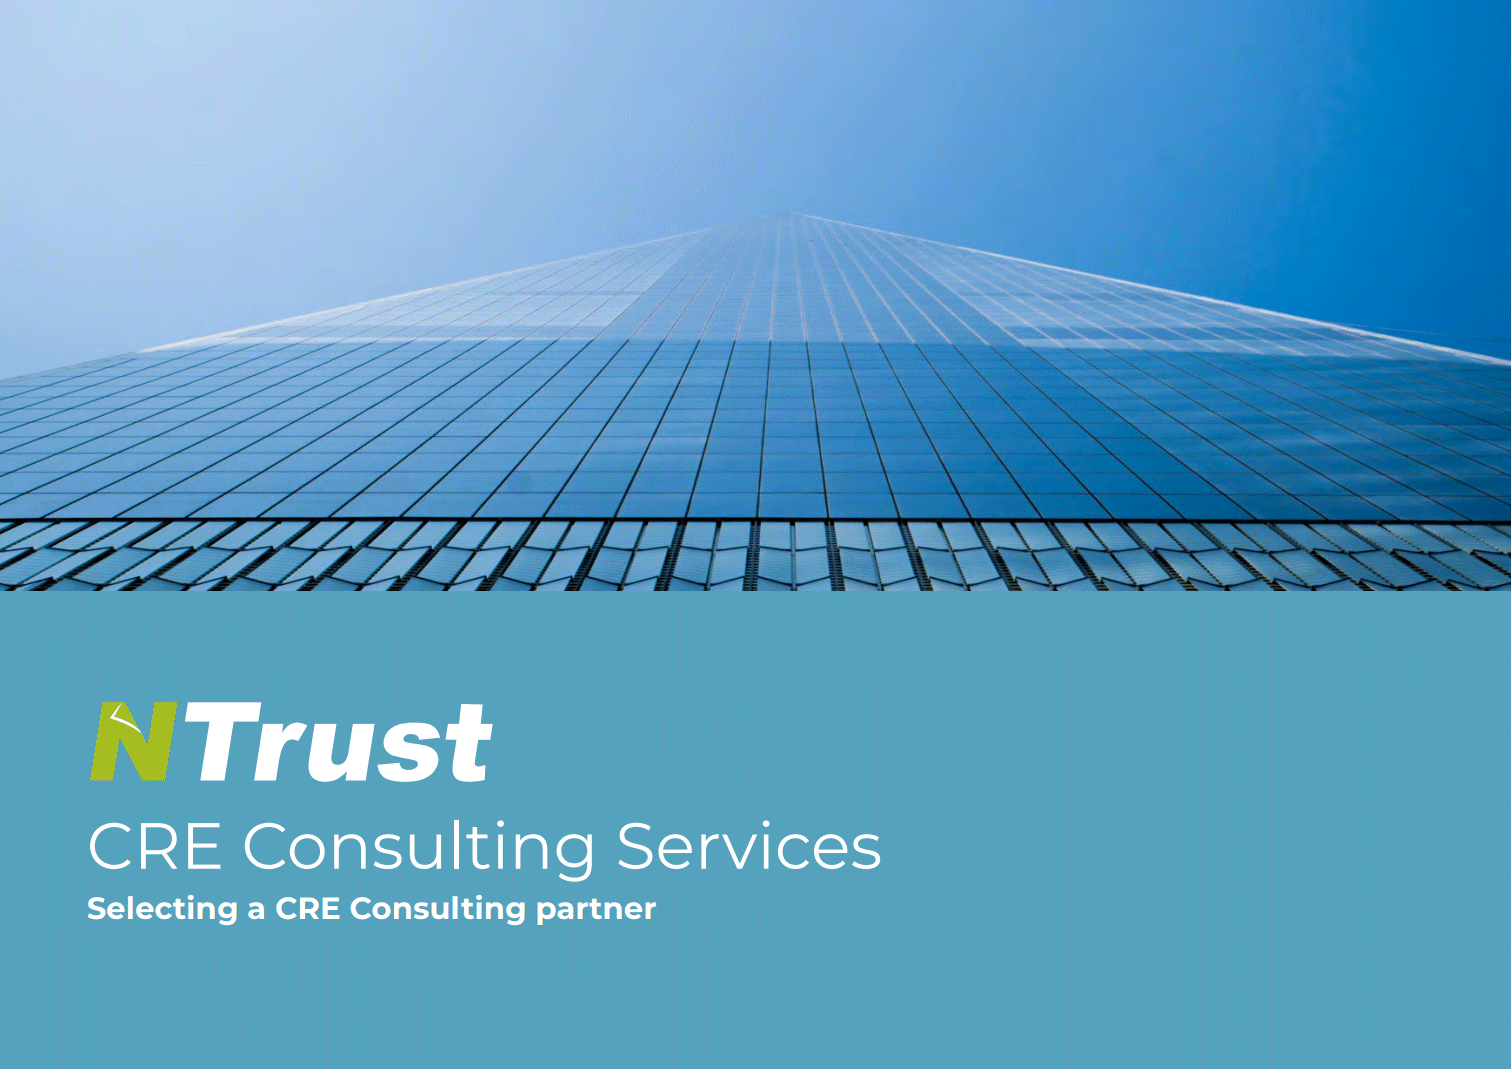 NTrust CRE Consulting Services